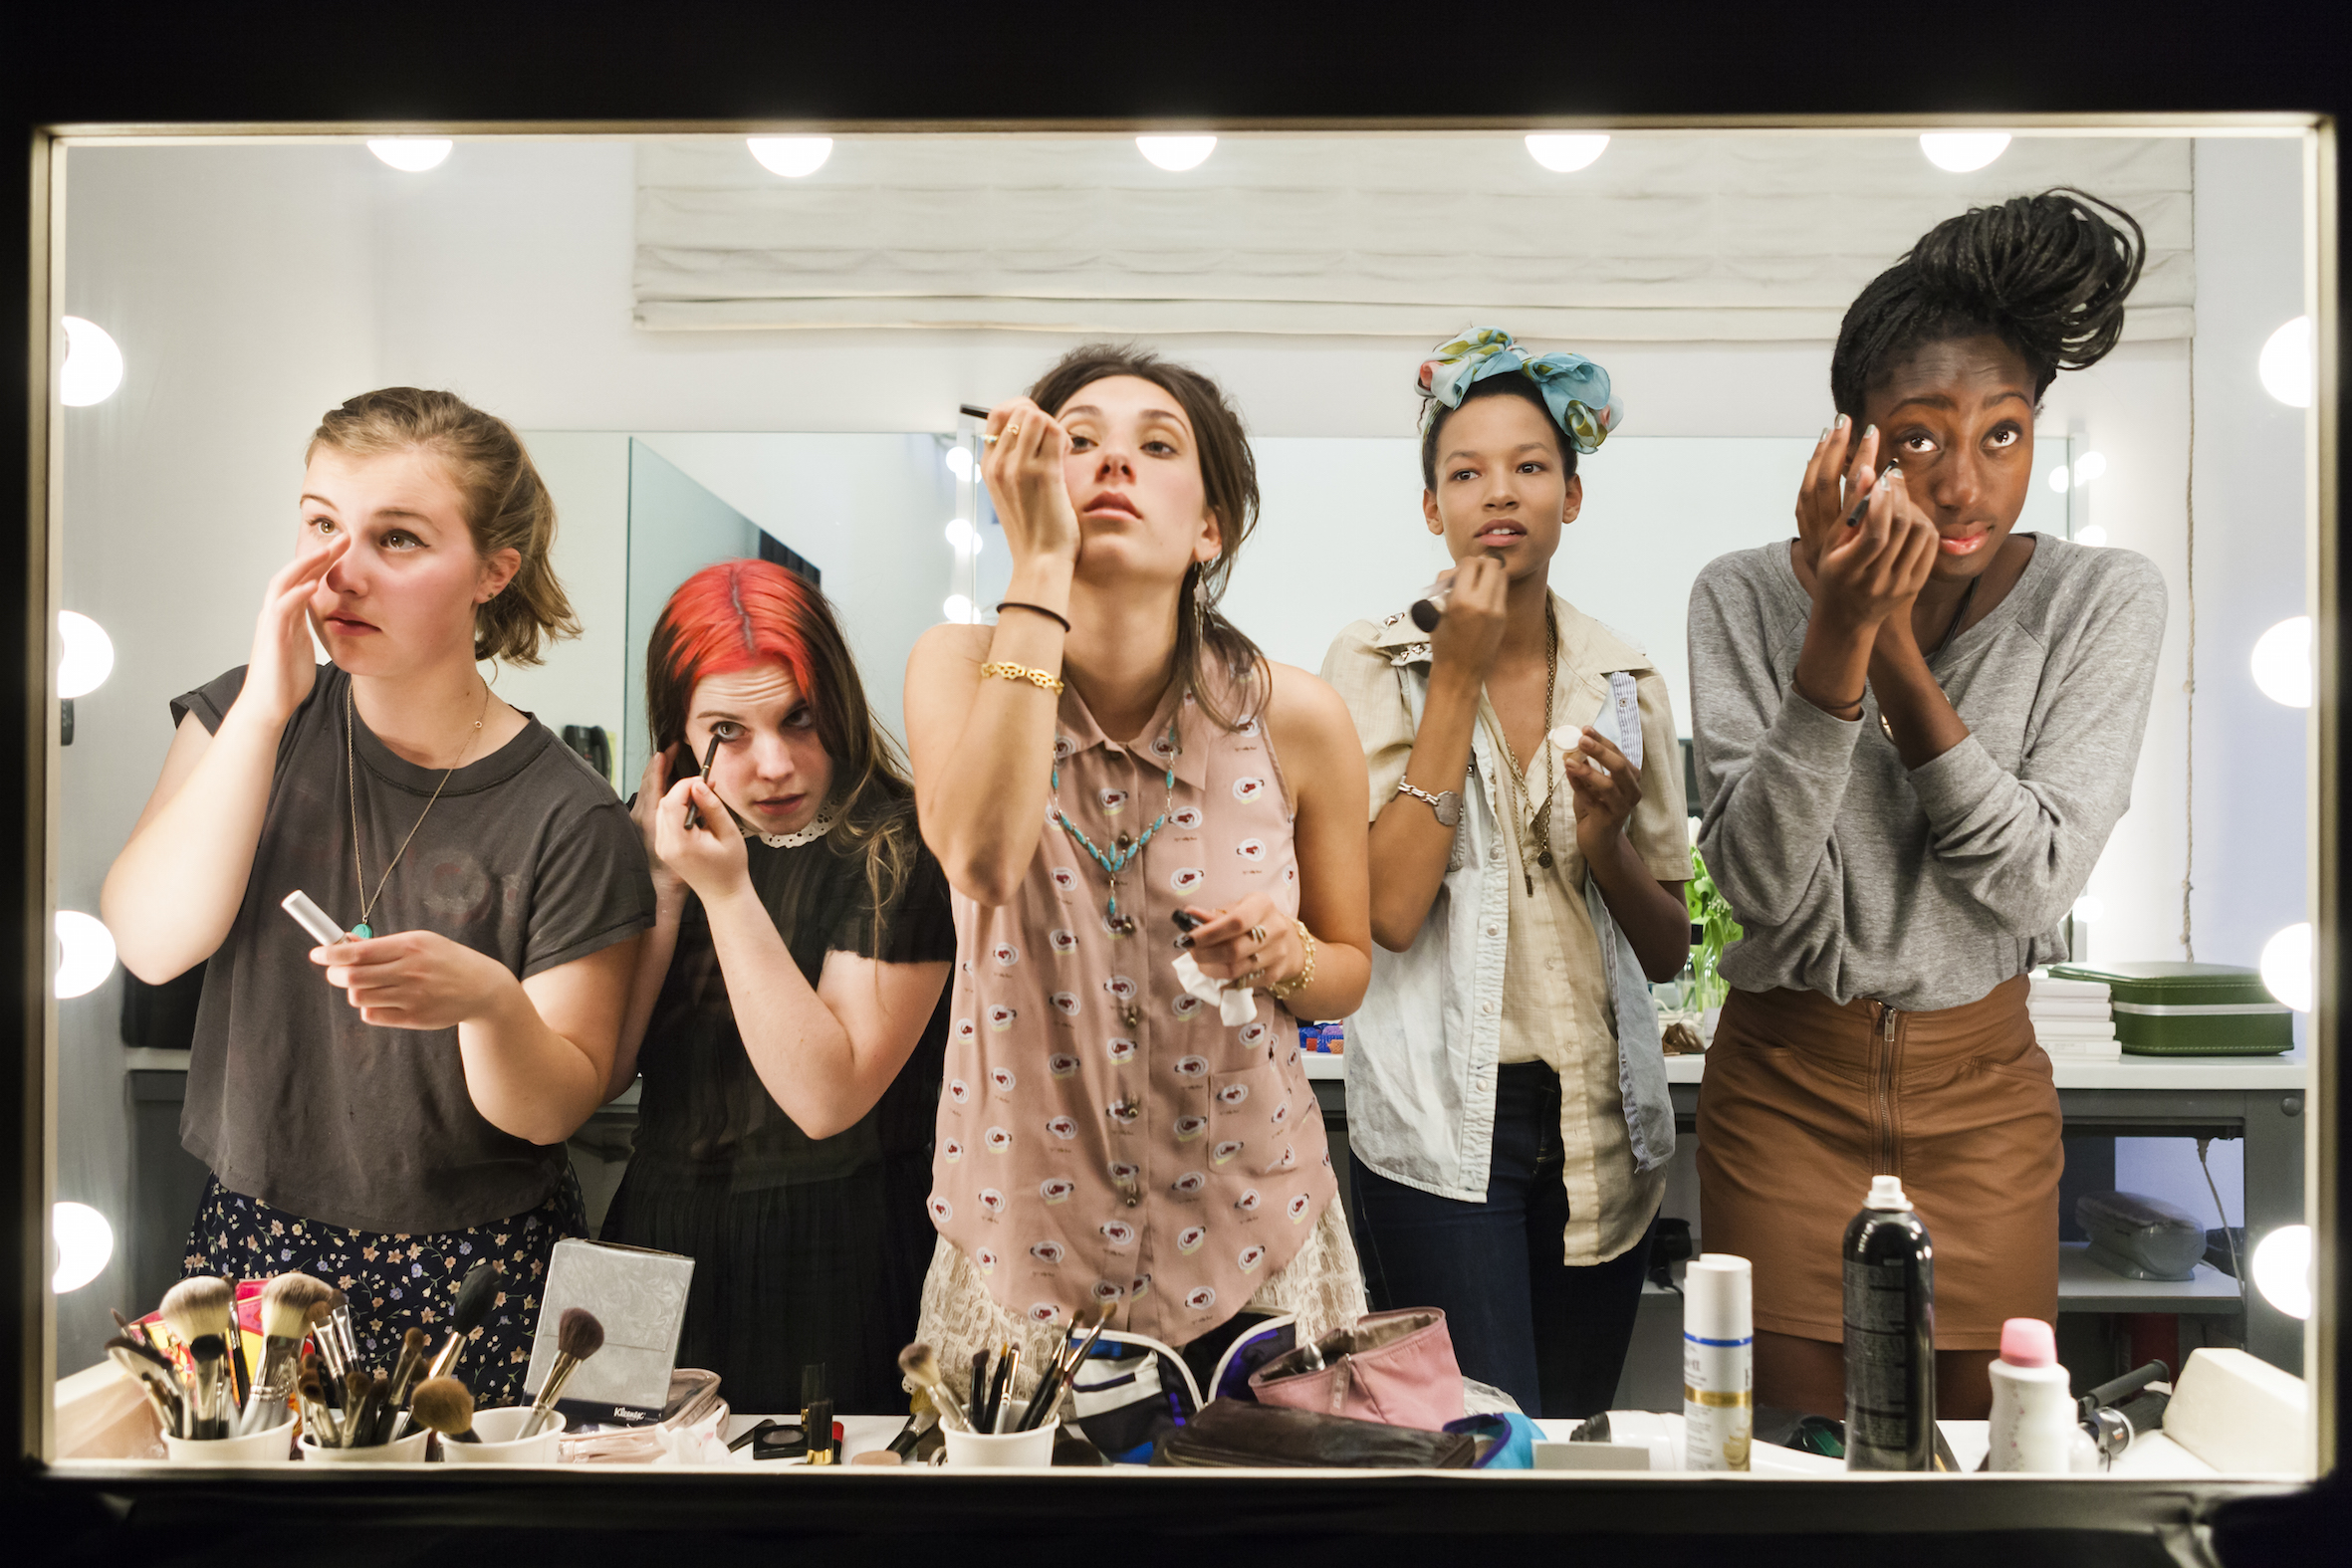 <p><strong>Lauren Greenfield</strong>, <em>High school seniors (from left) Lili, 17, Nicole, 18, Lauren, 18, Luna, 18, and Sam, 17, put on their makeup in front of a two-way mirror for Lauren Greenfield&#39;s Beauty CULTure documentary, Los Angeles</em>, 2011. From the series Generation Wealth, &copy; Lauren Greenfield.</p>
